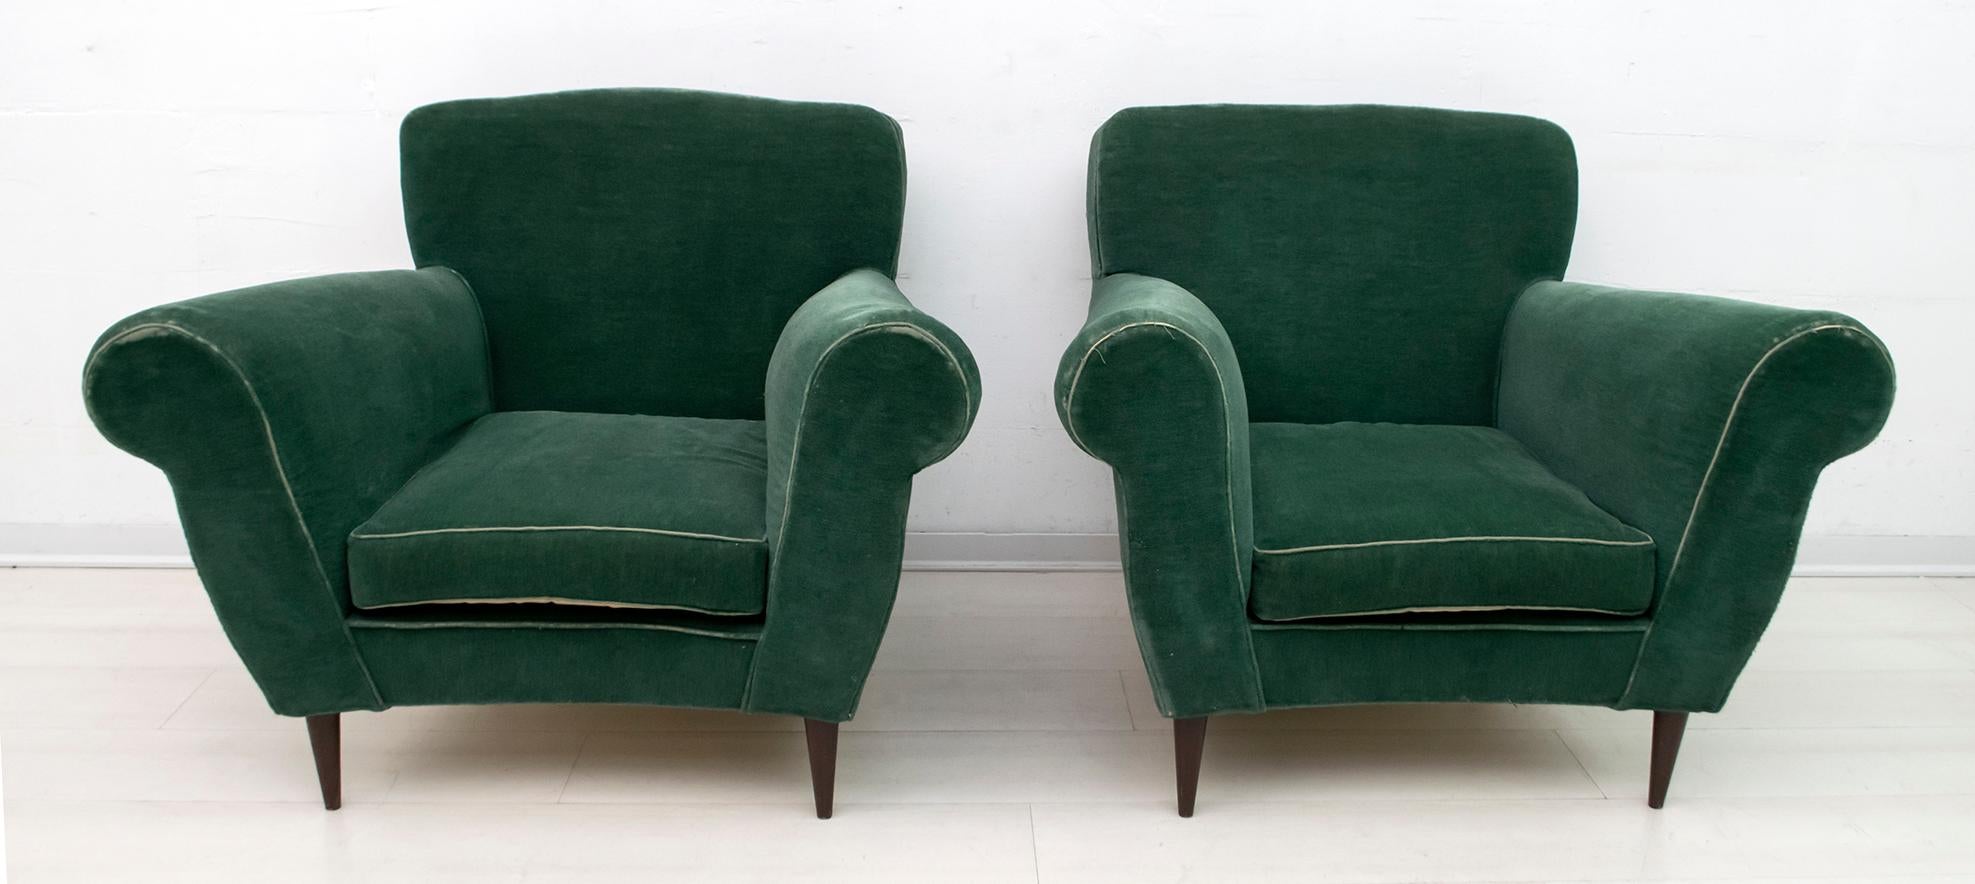 Pair of design armchairs, structure and legs in solid wood, velvet upholstery, 1950s production,
Condition as shown in the photos, it is recommended to redo the upholstery.